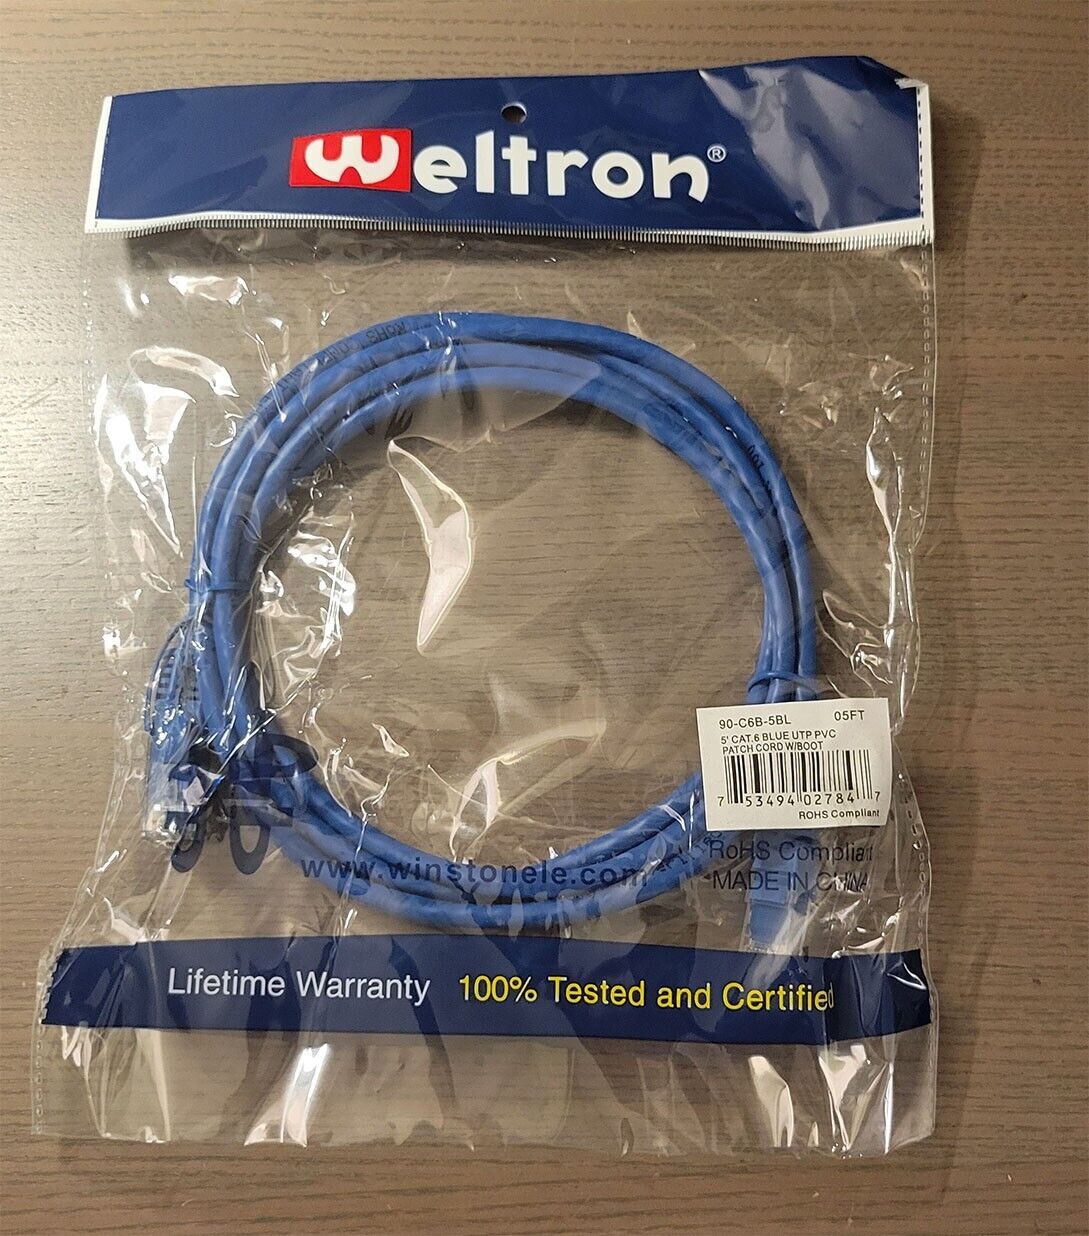 Weltron 90-C5EB-7BL Patch Cable NEW SEALED